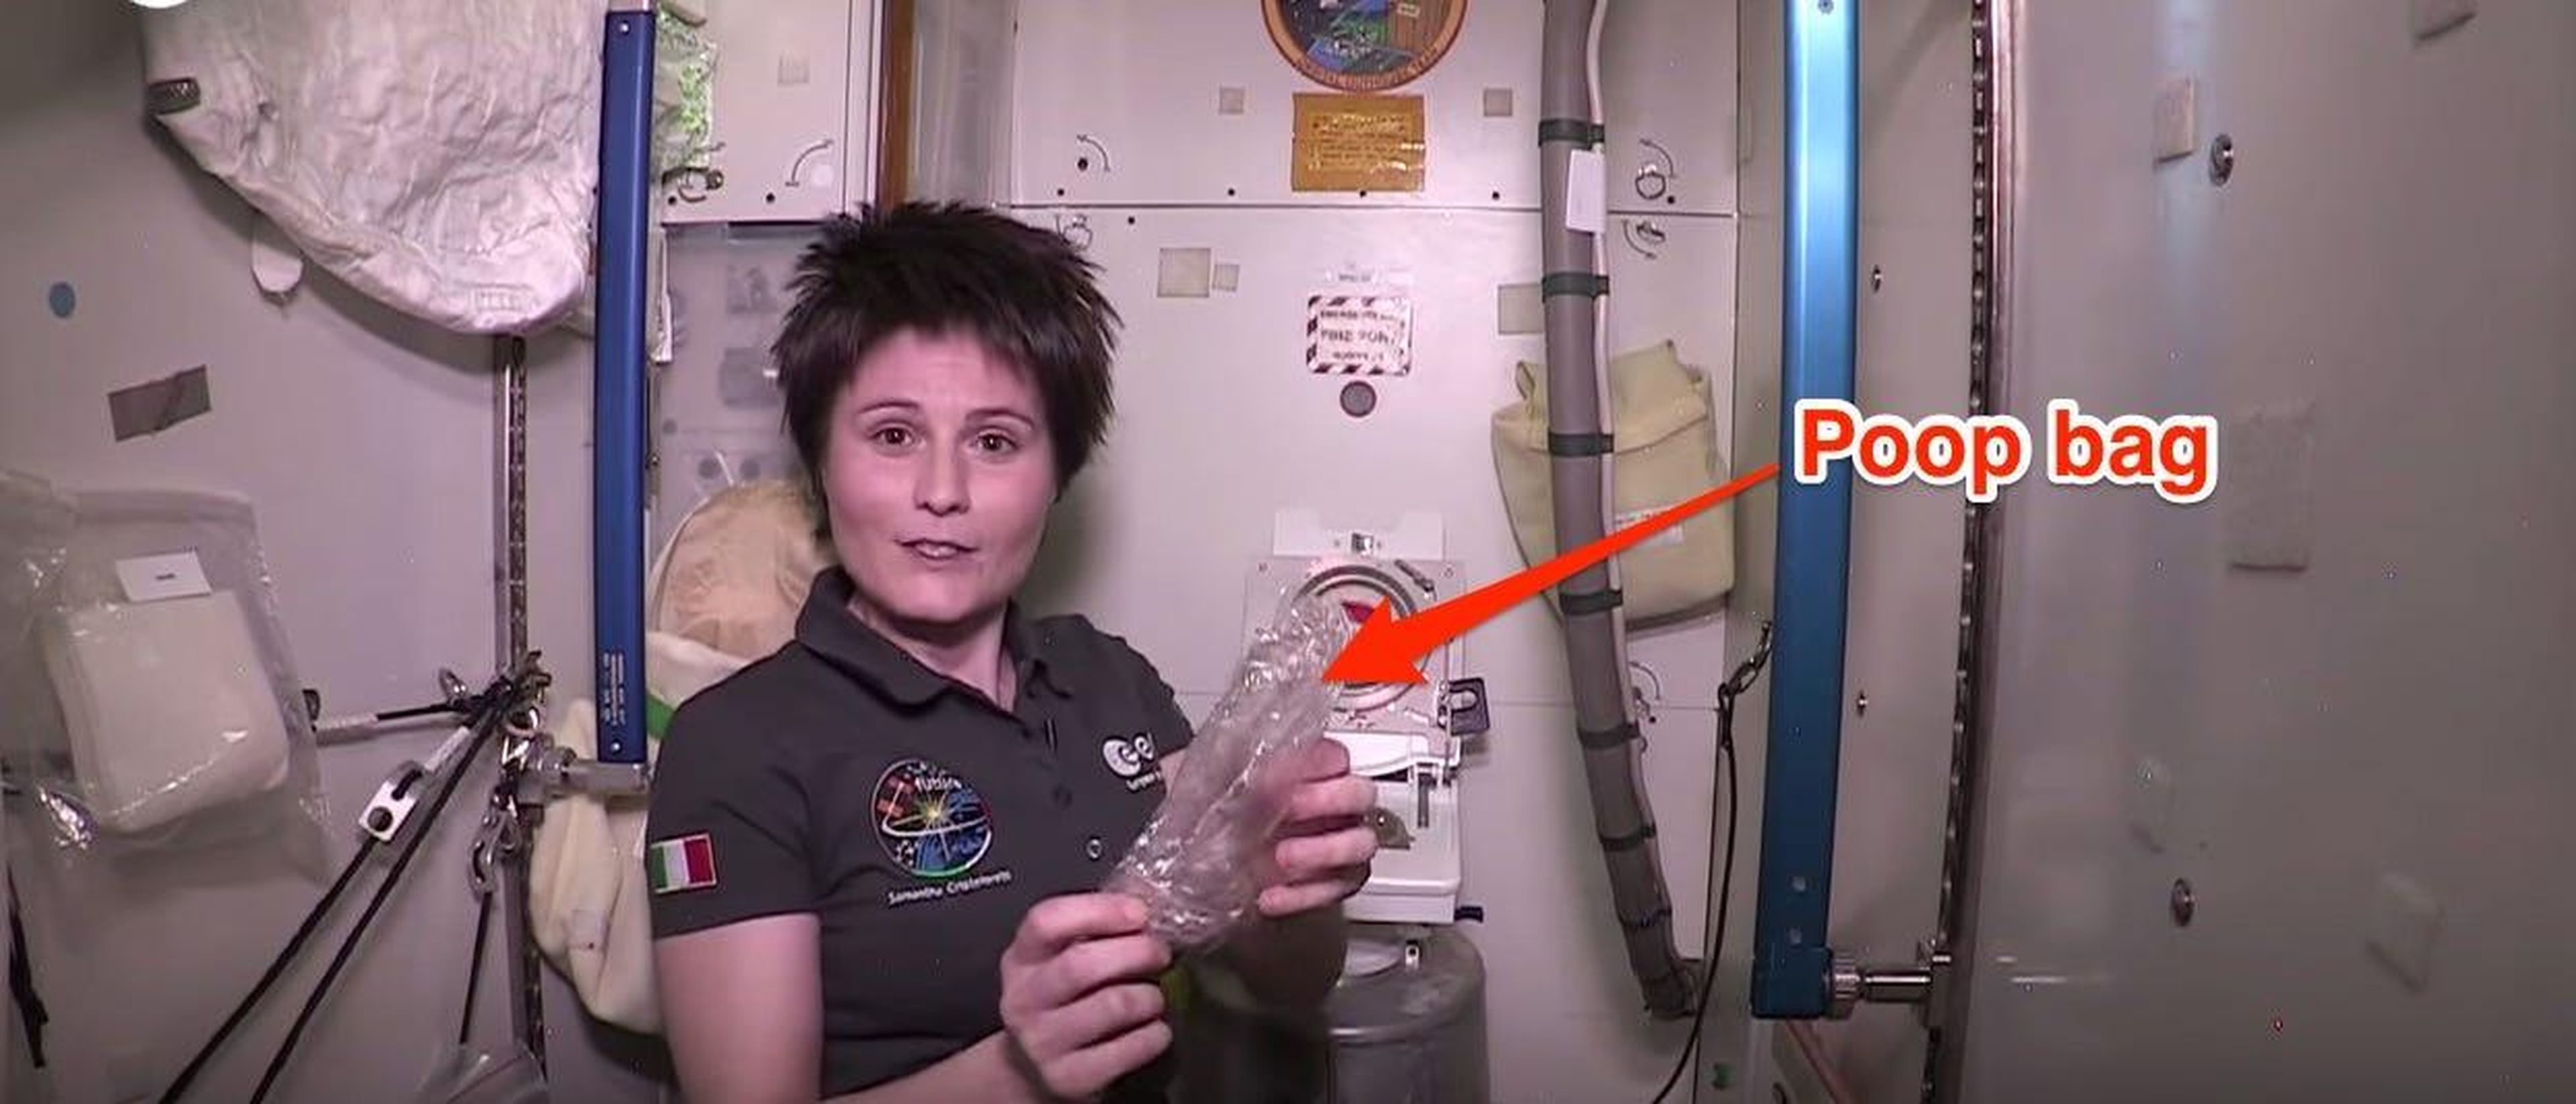 The Italian astronaut Samantha Cristoforetti demonstrated how to use the Russian toilet on the International Space Station in 2015. YouTube/ESA